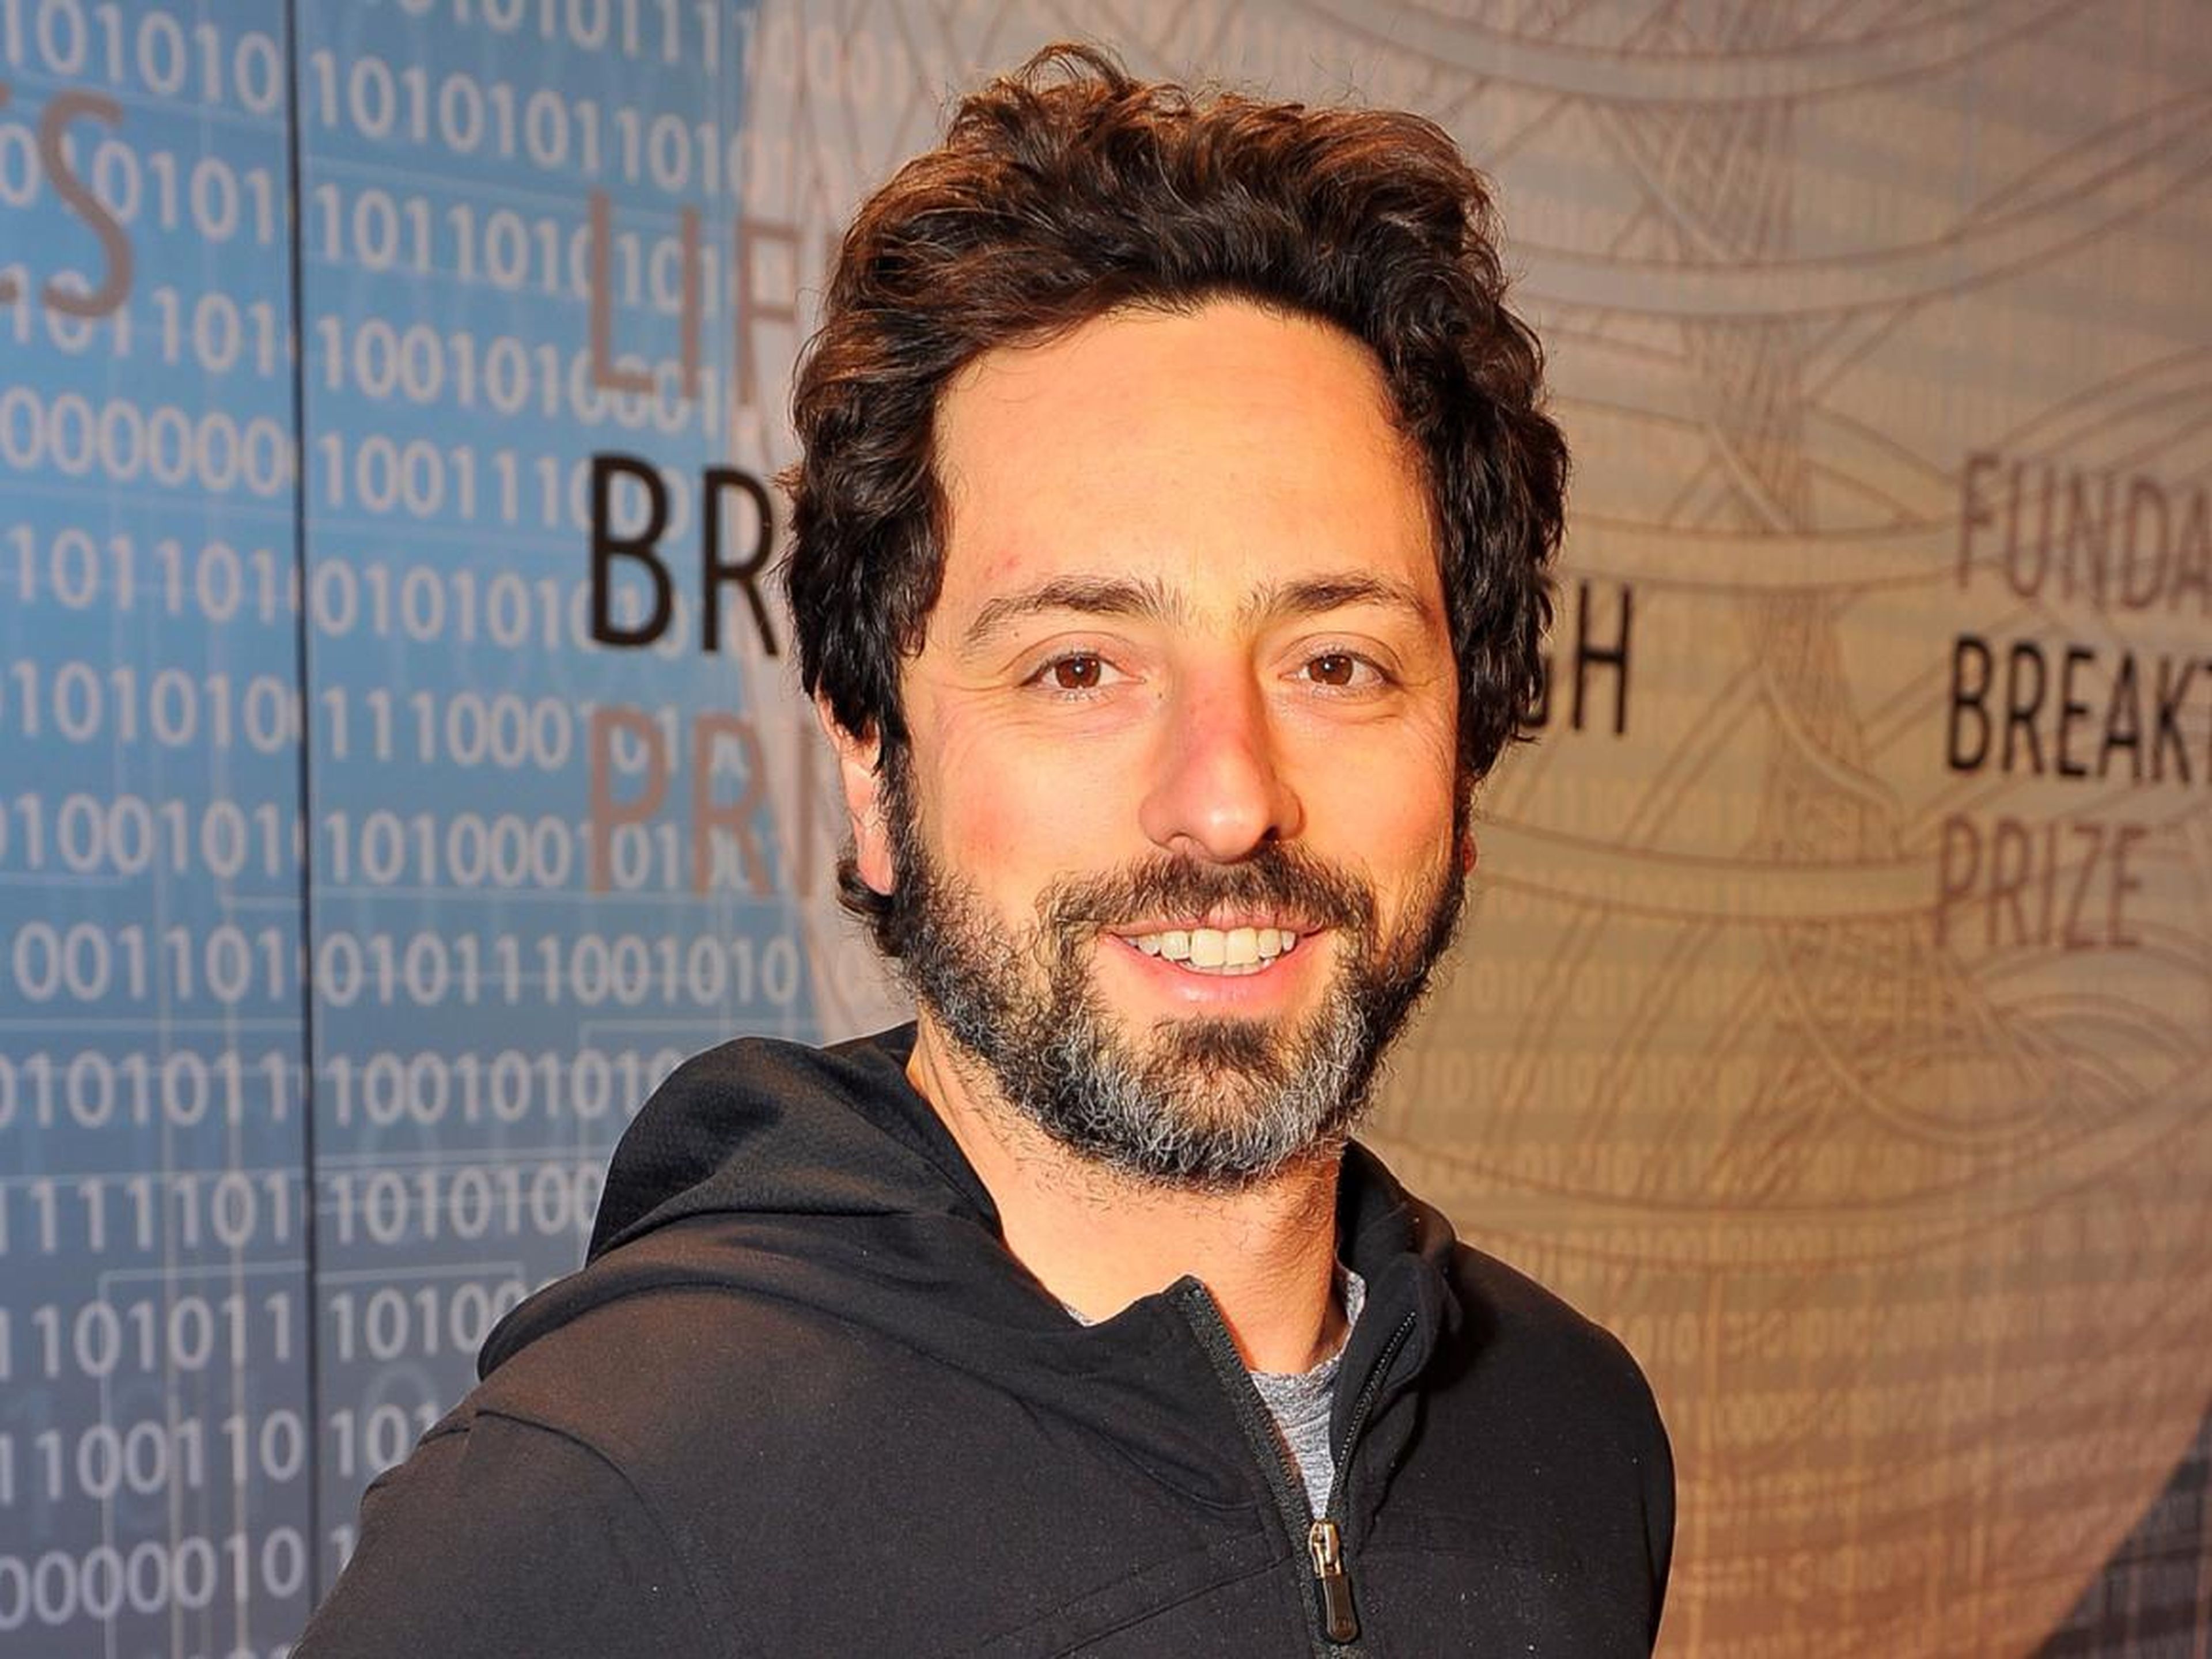 "You always hear the phrase, money doesn’t buy you happiness. But I always in the back of my mind figured a lot of money will buy you a little bit of happiness. But it's not really true." — Sergey Brin, Google cofounder and